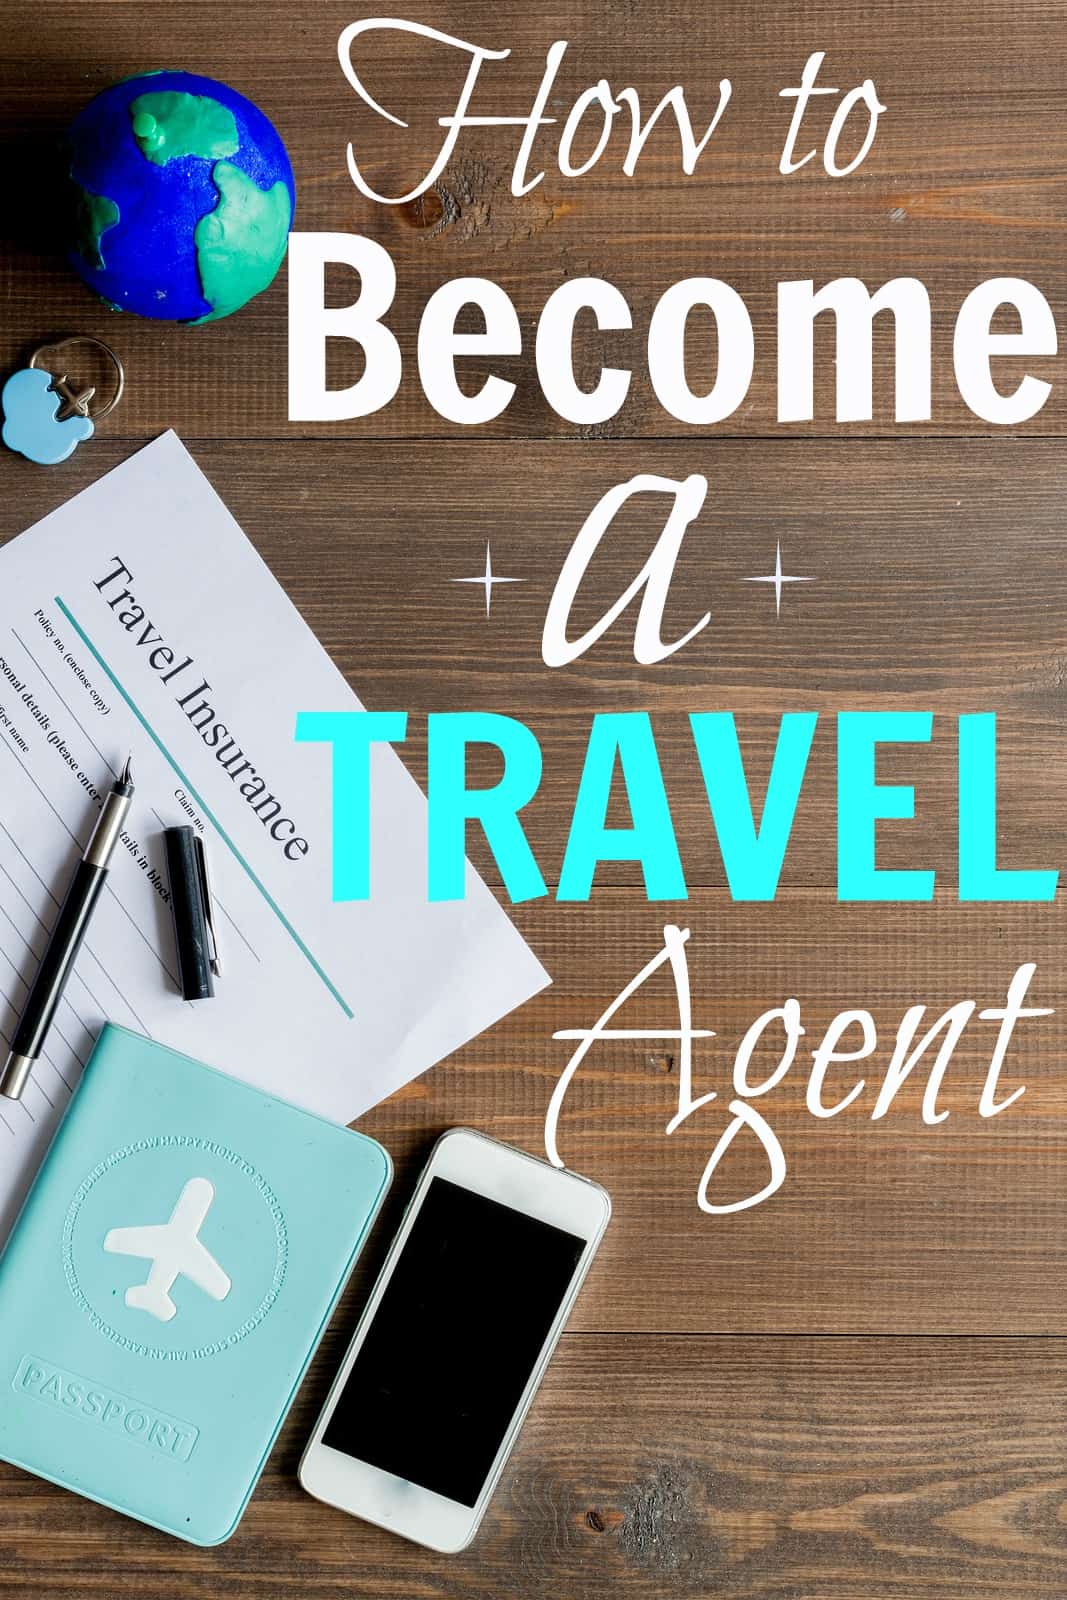 want to become travel agent